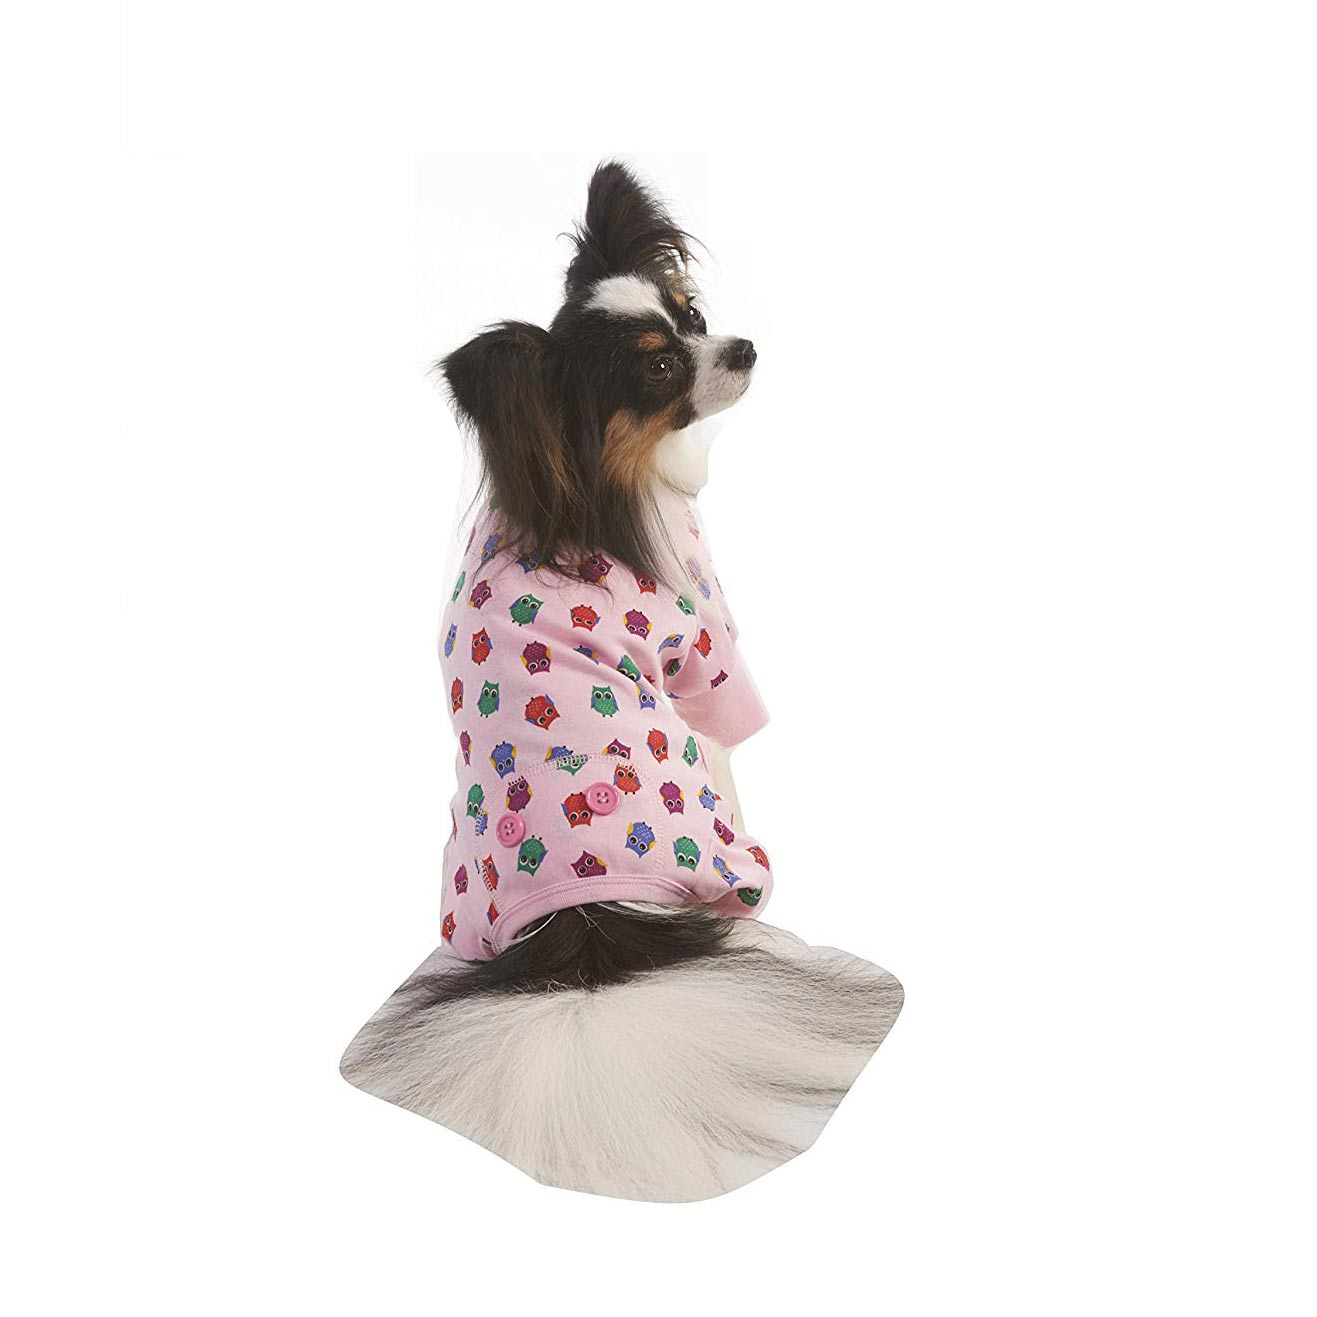 Ethical Products Inc.- Small Pink Owl Print PJ's <p> Snuggle up in these